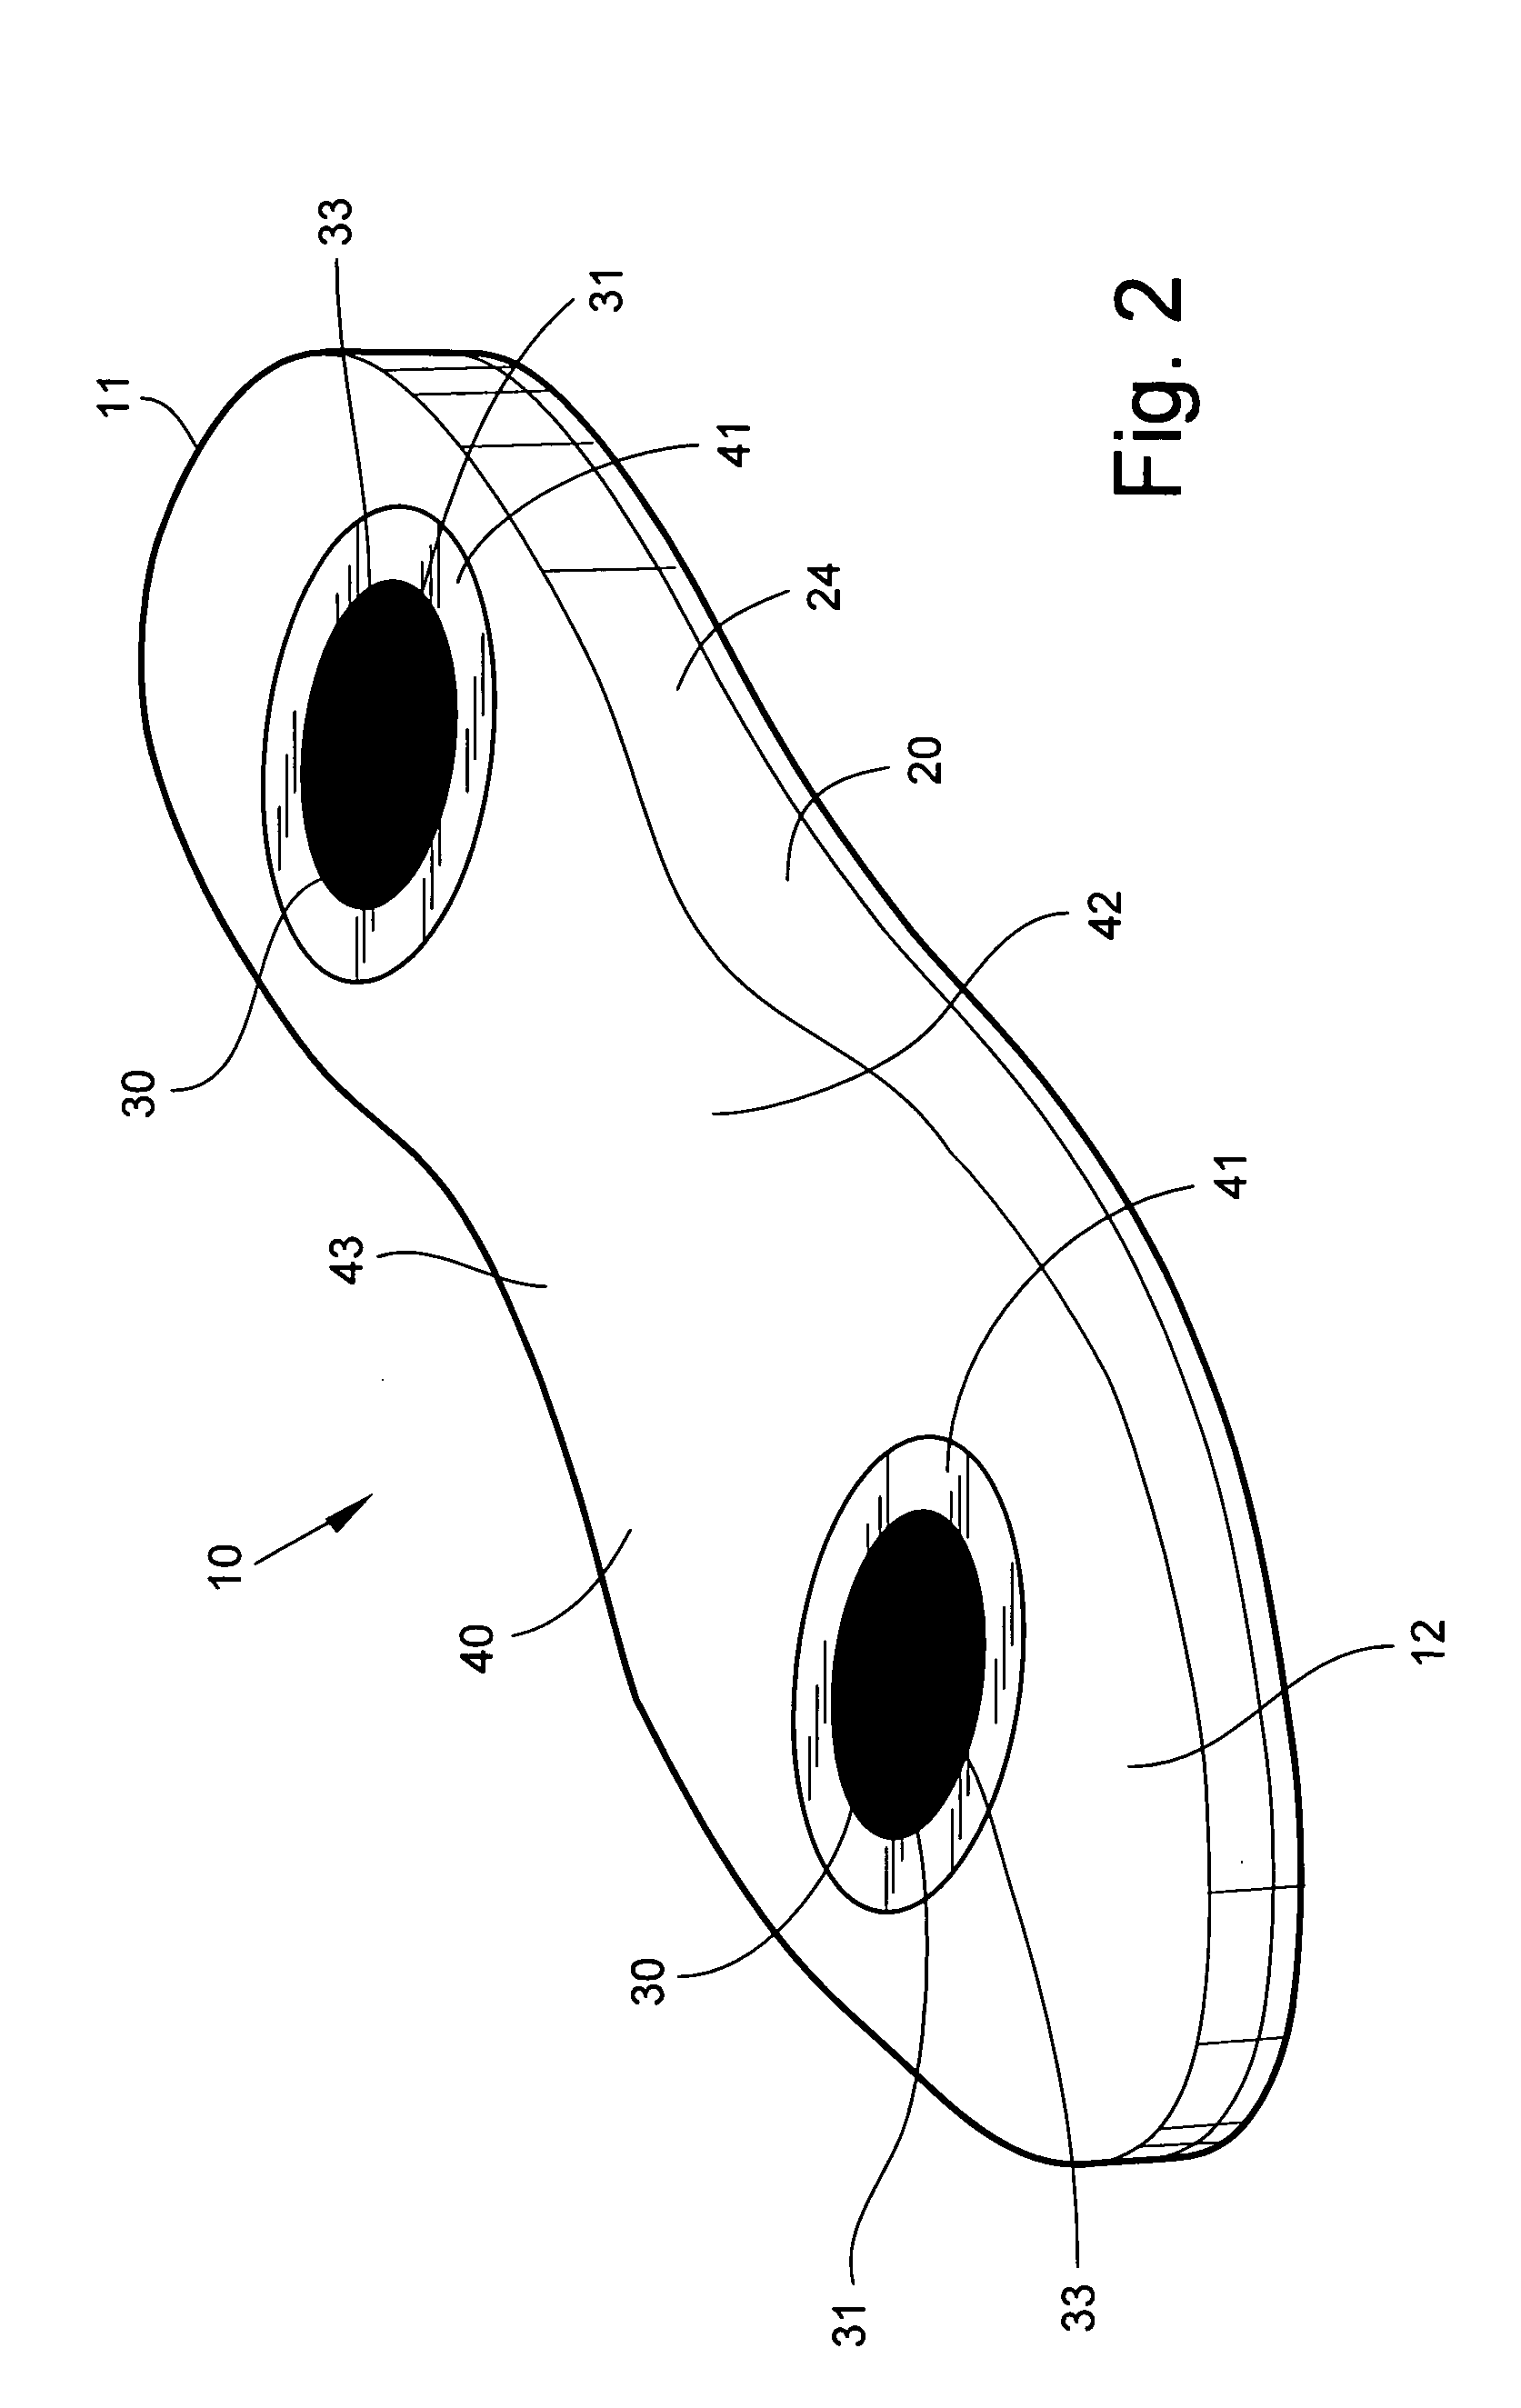 Footwear with display element